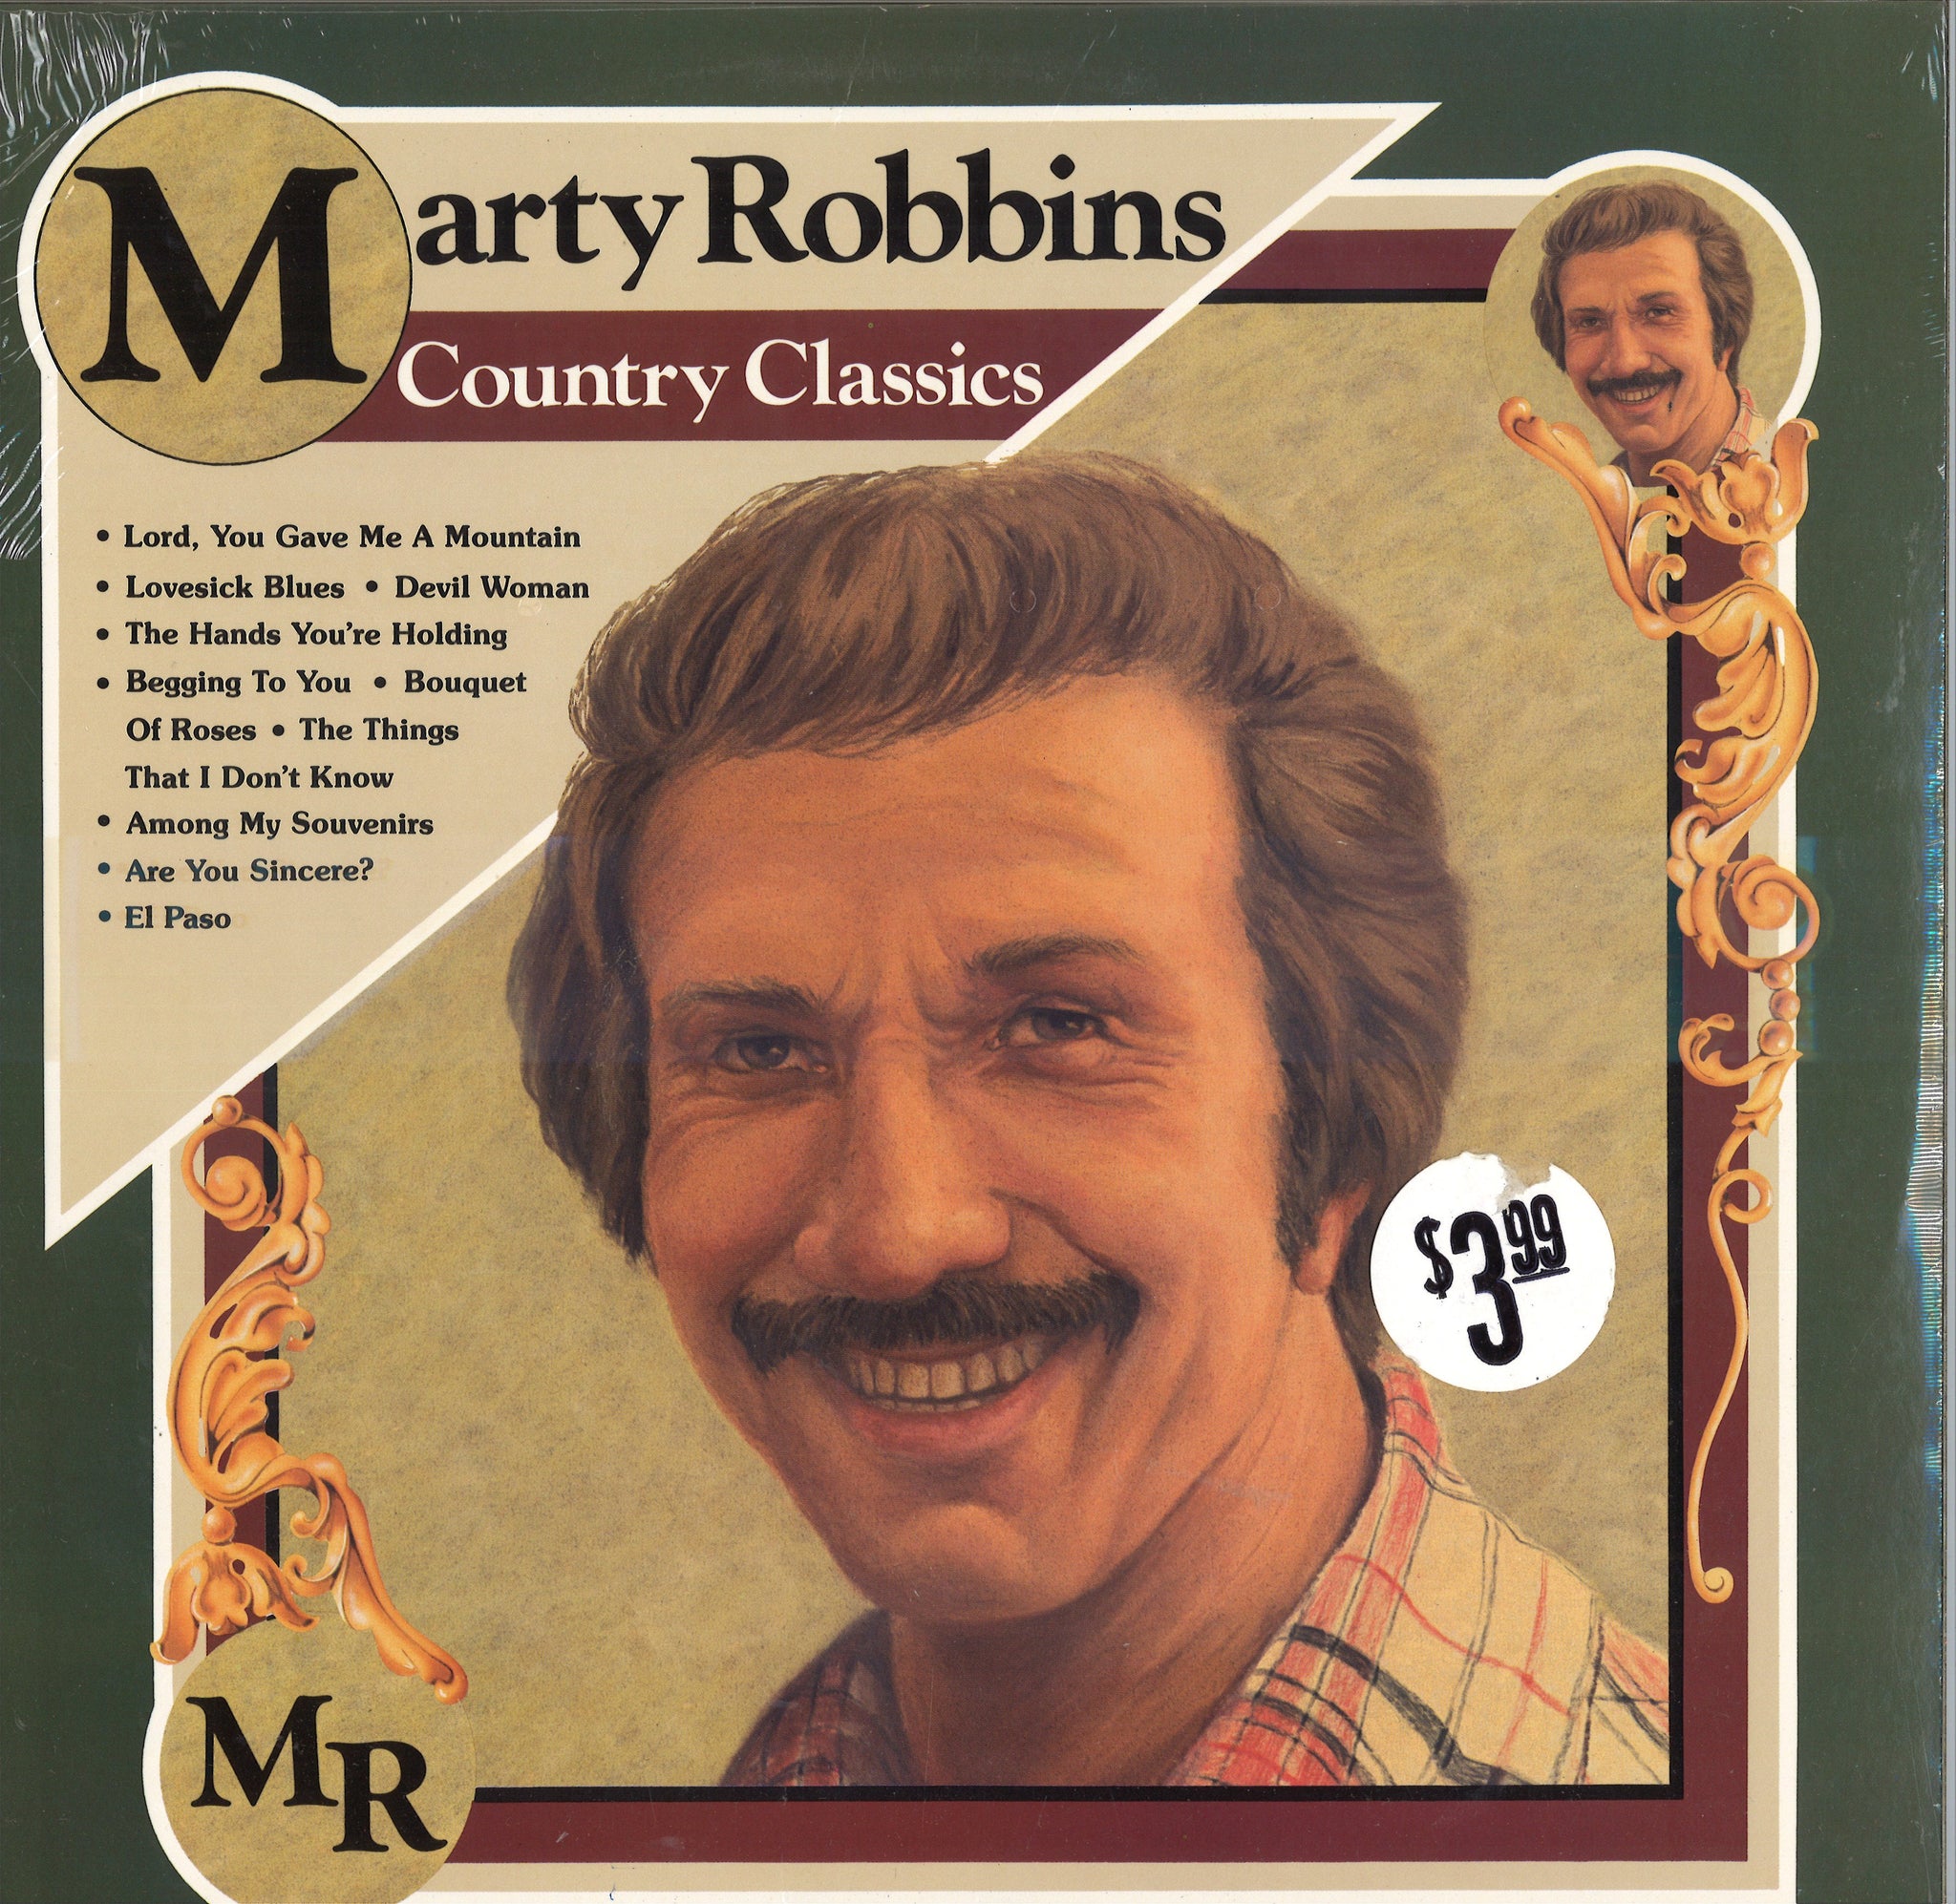 Marty Robbins Country Classics